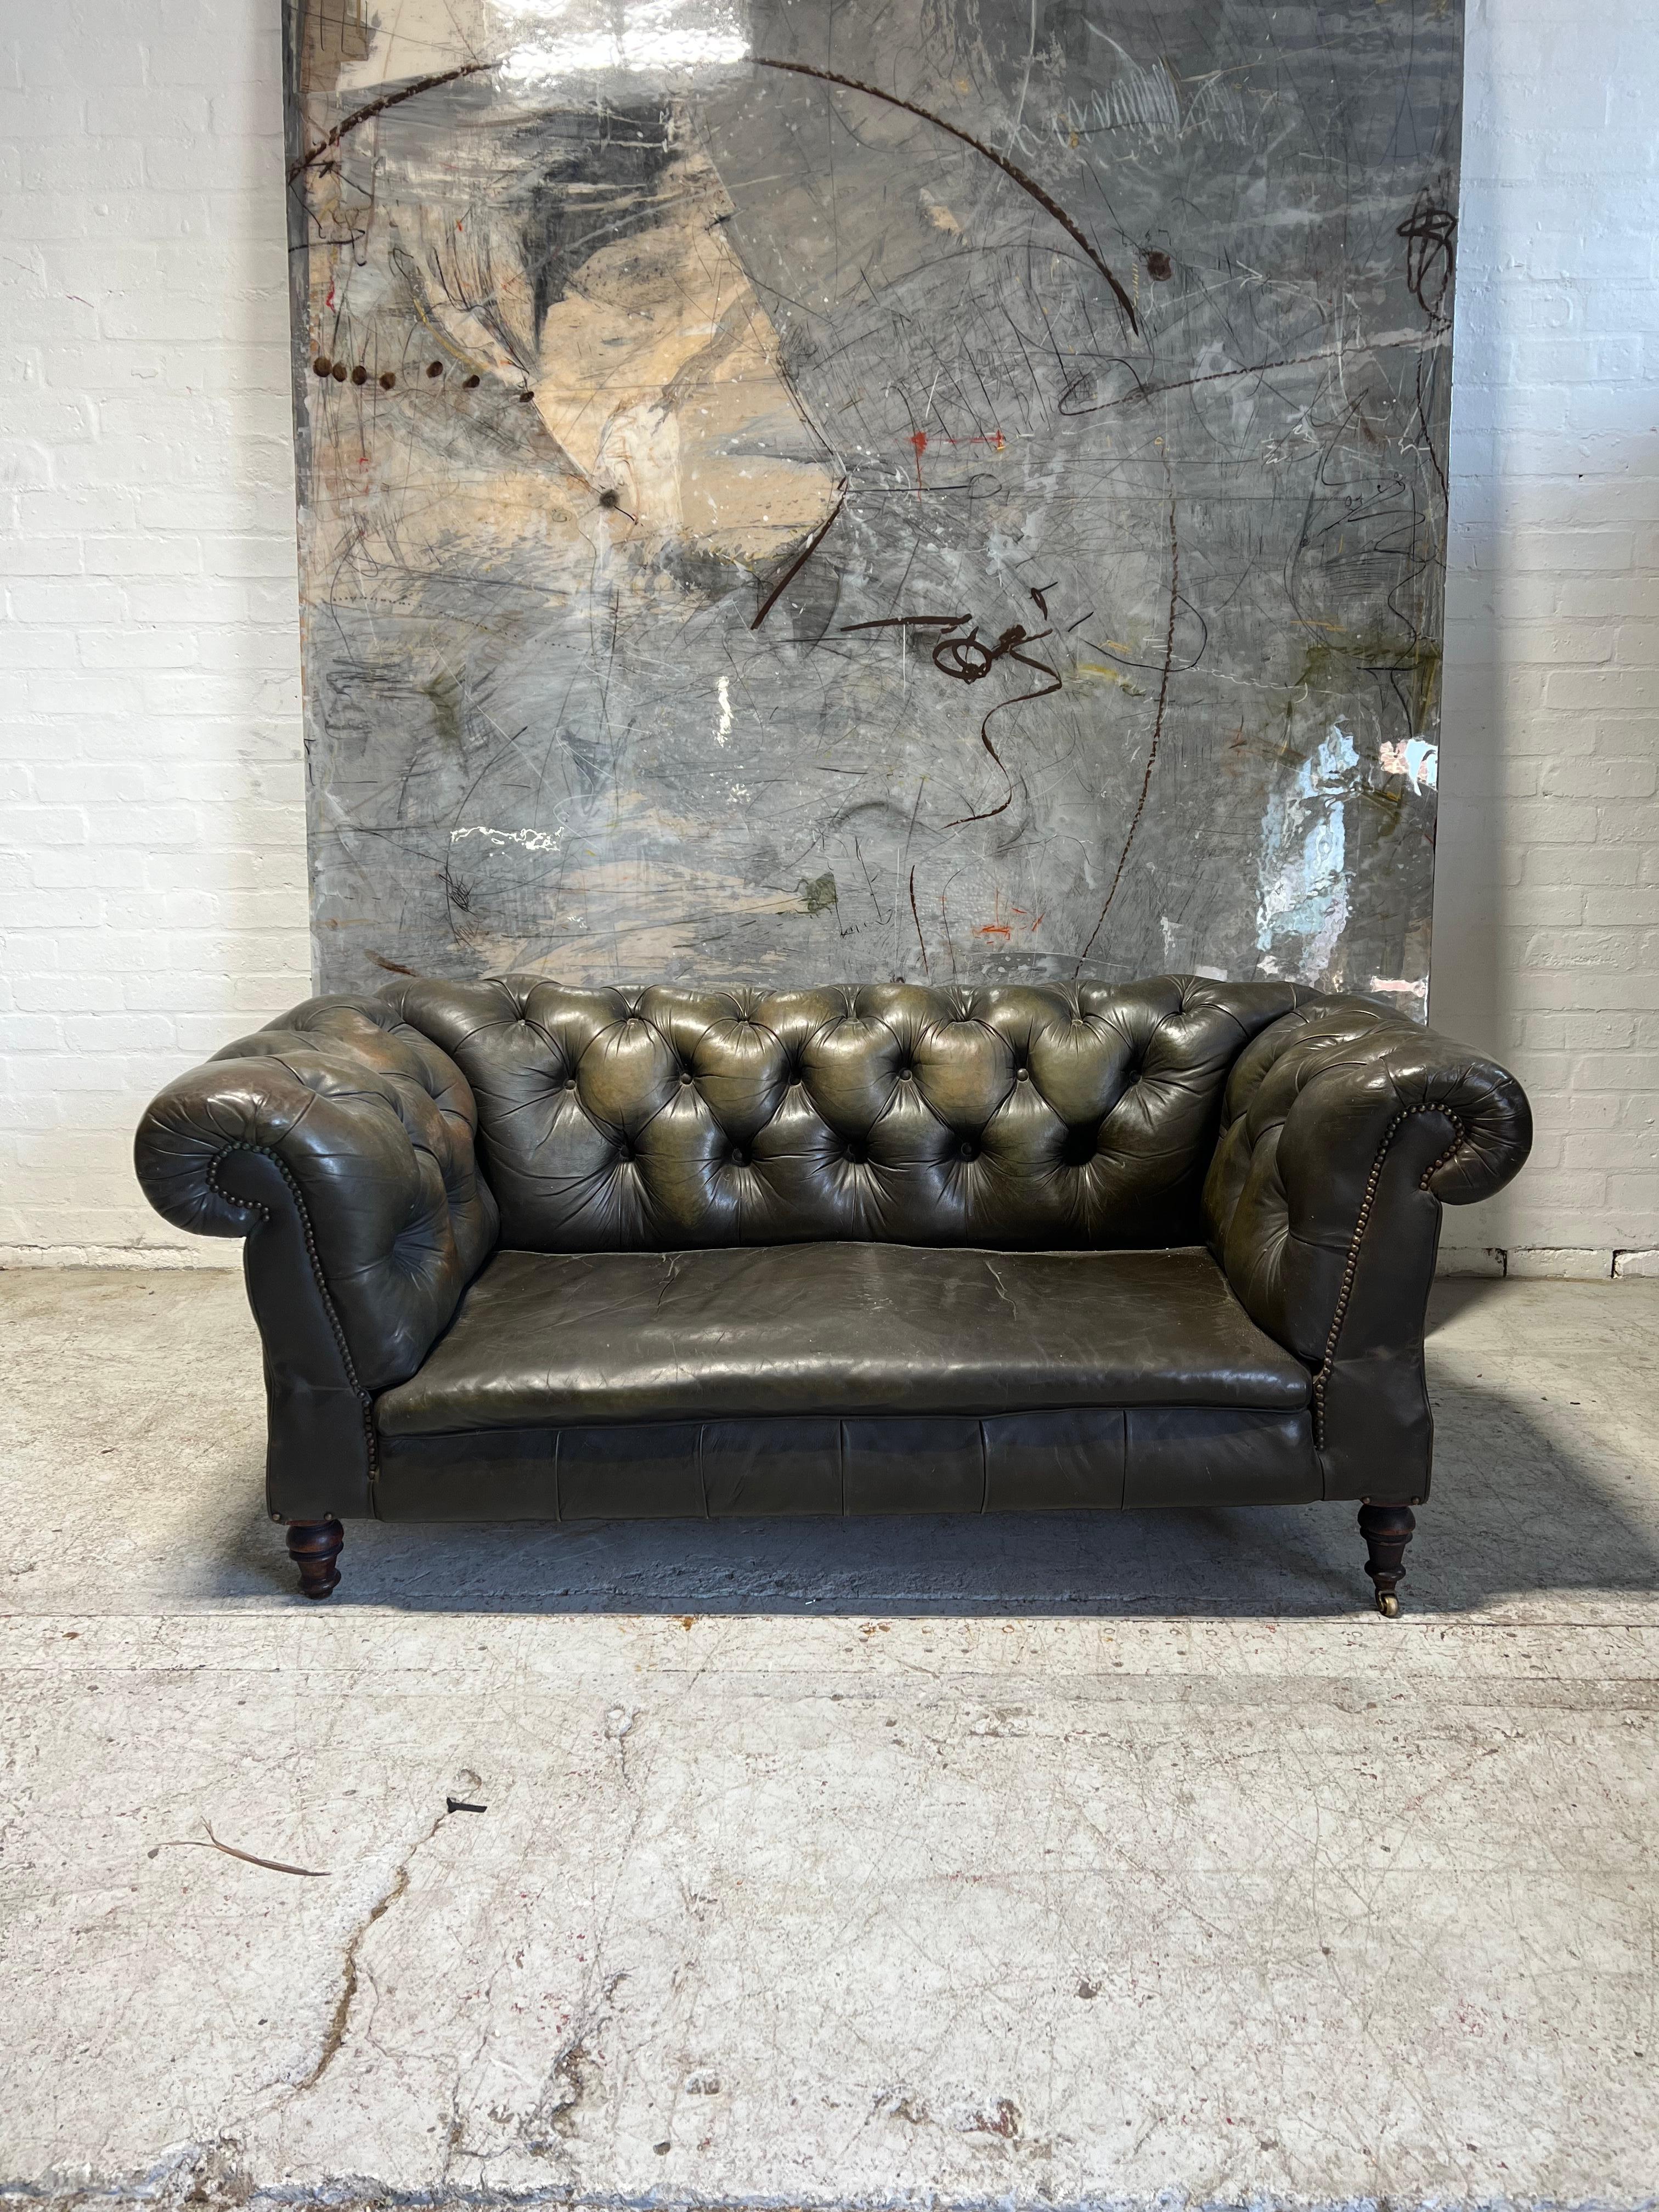 As a Lapada dealer and furniture maker, I always have a very good selection of pieces in stock with a wide range of price points.

A very rare find indeed.  Well functioning and beautiful patina.

This double drop arm chesterfield has such